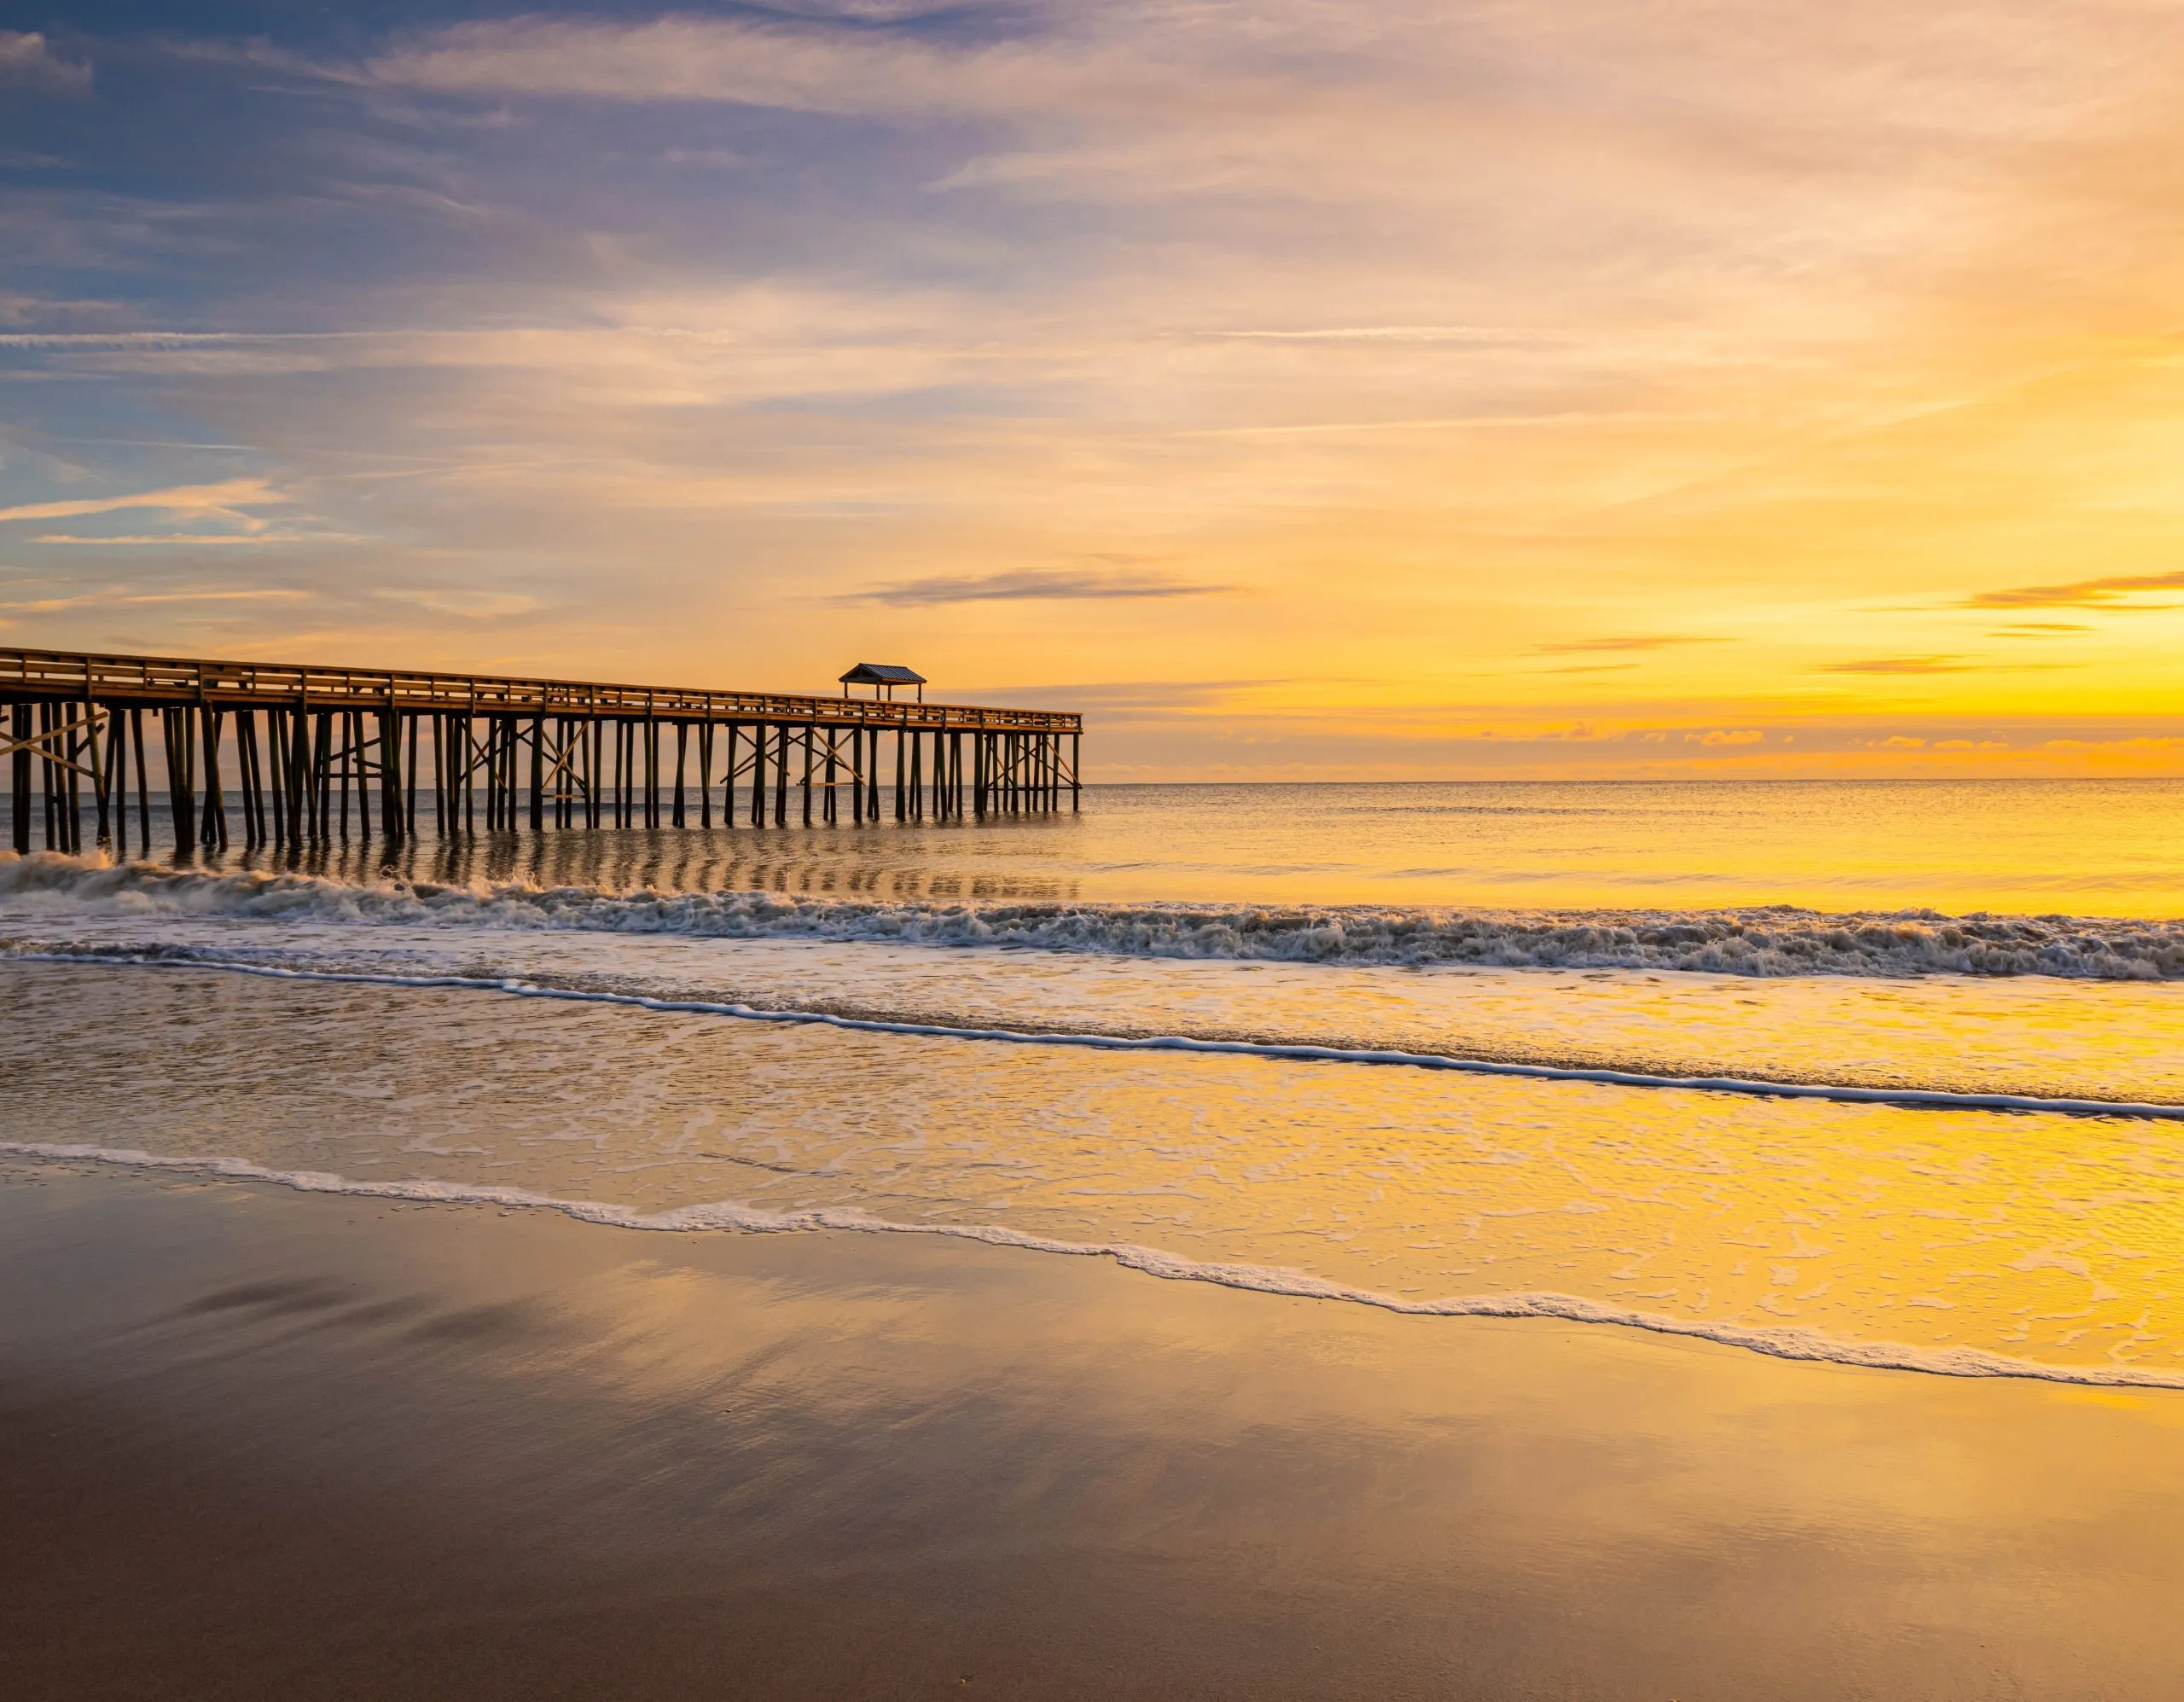 sunrise over the ocean and wooden pier at fernandina beach, one of the many beautiful east coast beach towns